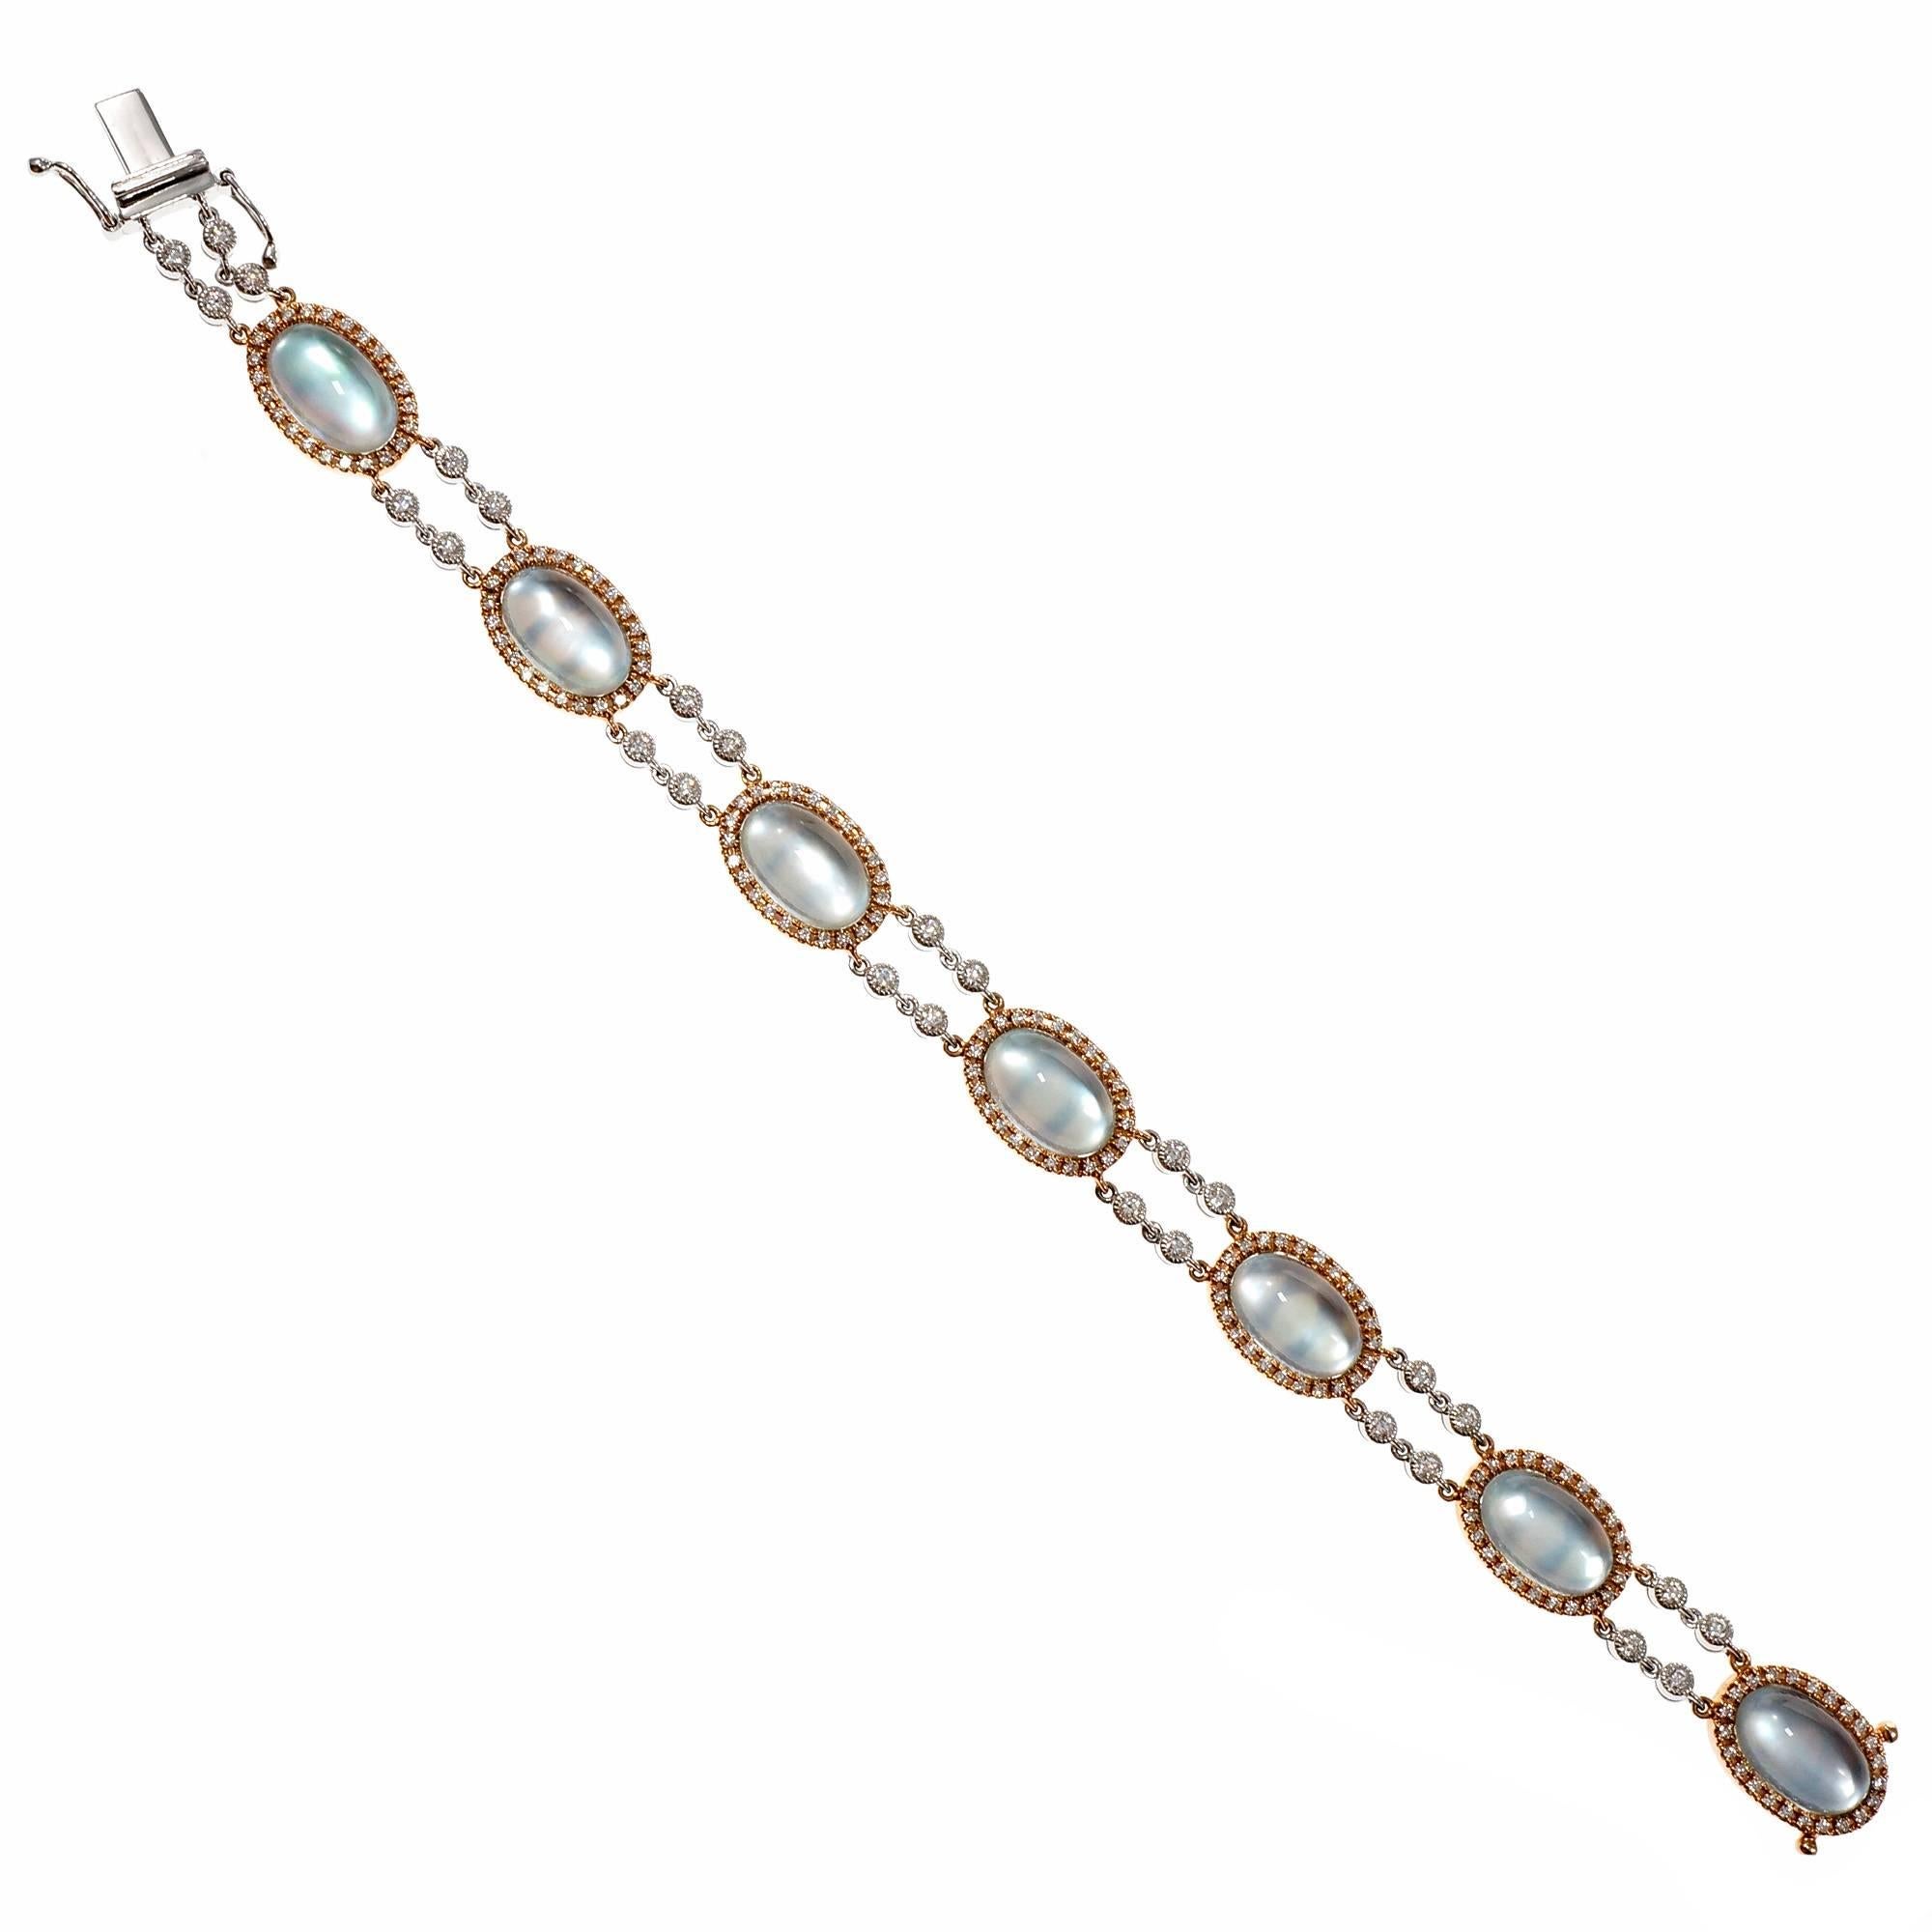 Designer JMP blue Topaz cabochon rose and white gold bracelet with  Diamond accents. The blue Topaz mounted on Mother of Pearl has a blue glow. Set in rose and white gold. 

189 round full cut Diamonds, approx. total weight 1.44cts, G – H, VS1 –